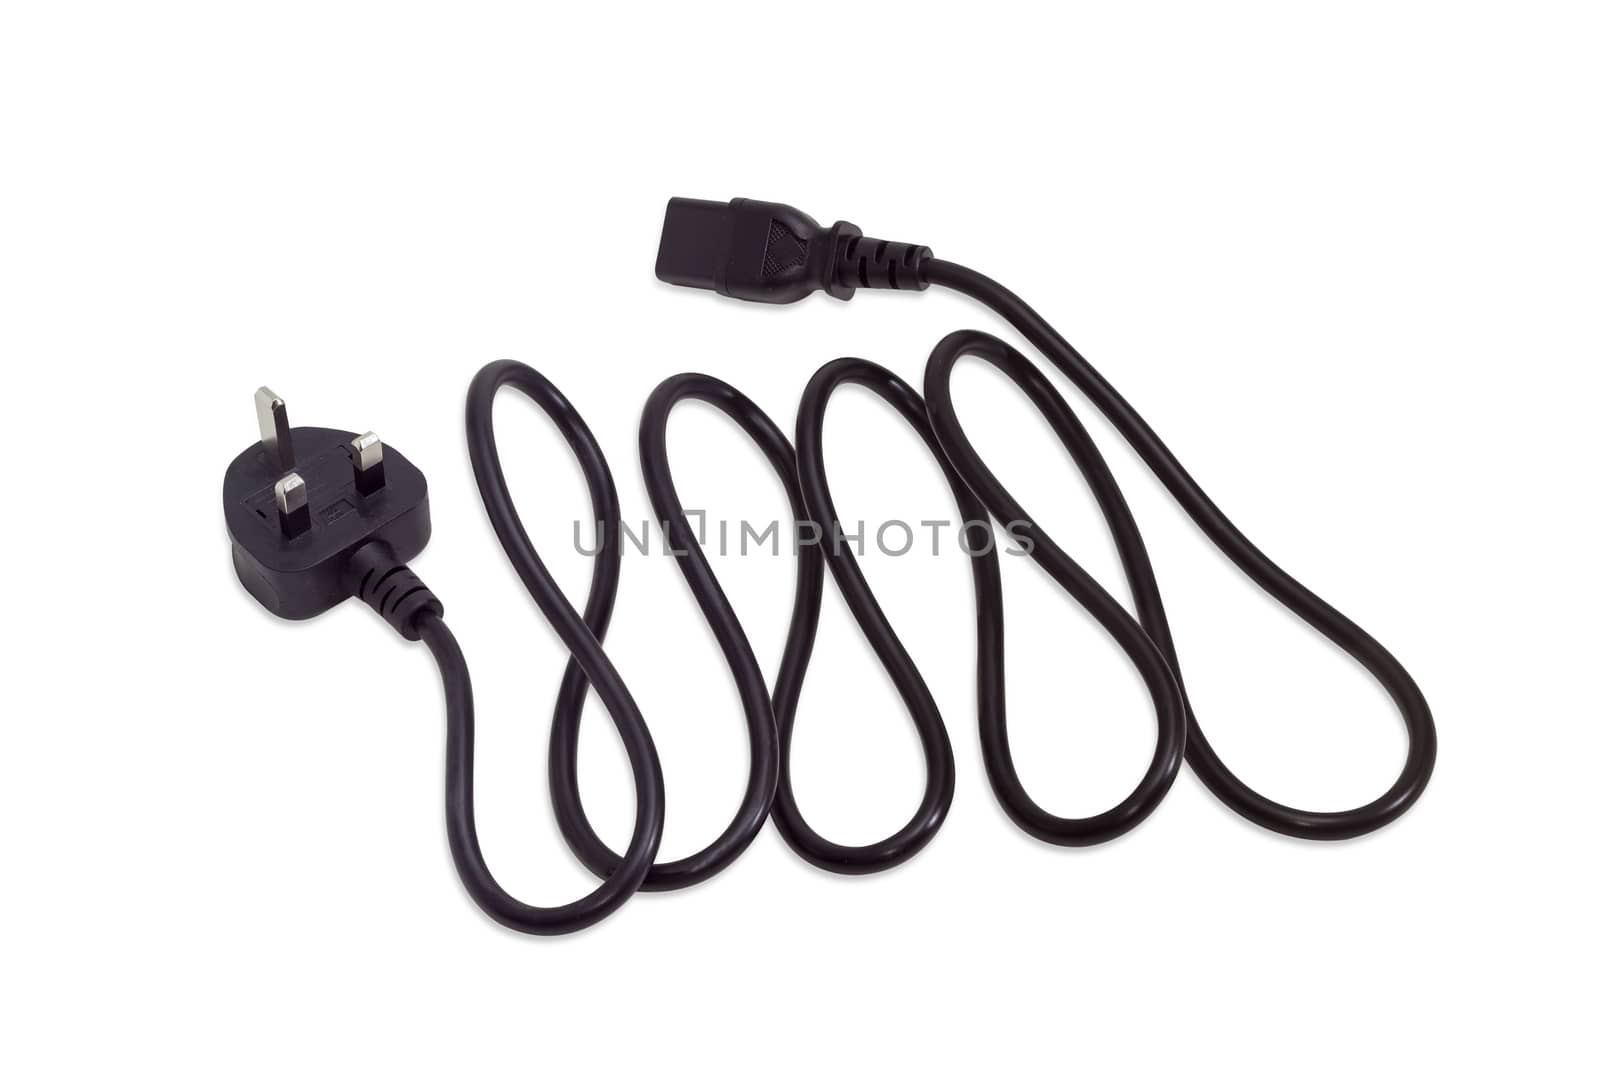 Black power cable with the BS 1363 plug equipped with a fuse and three rectangular pins and the C13 connector on a light background
